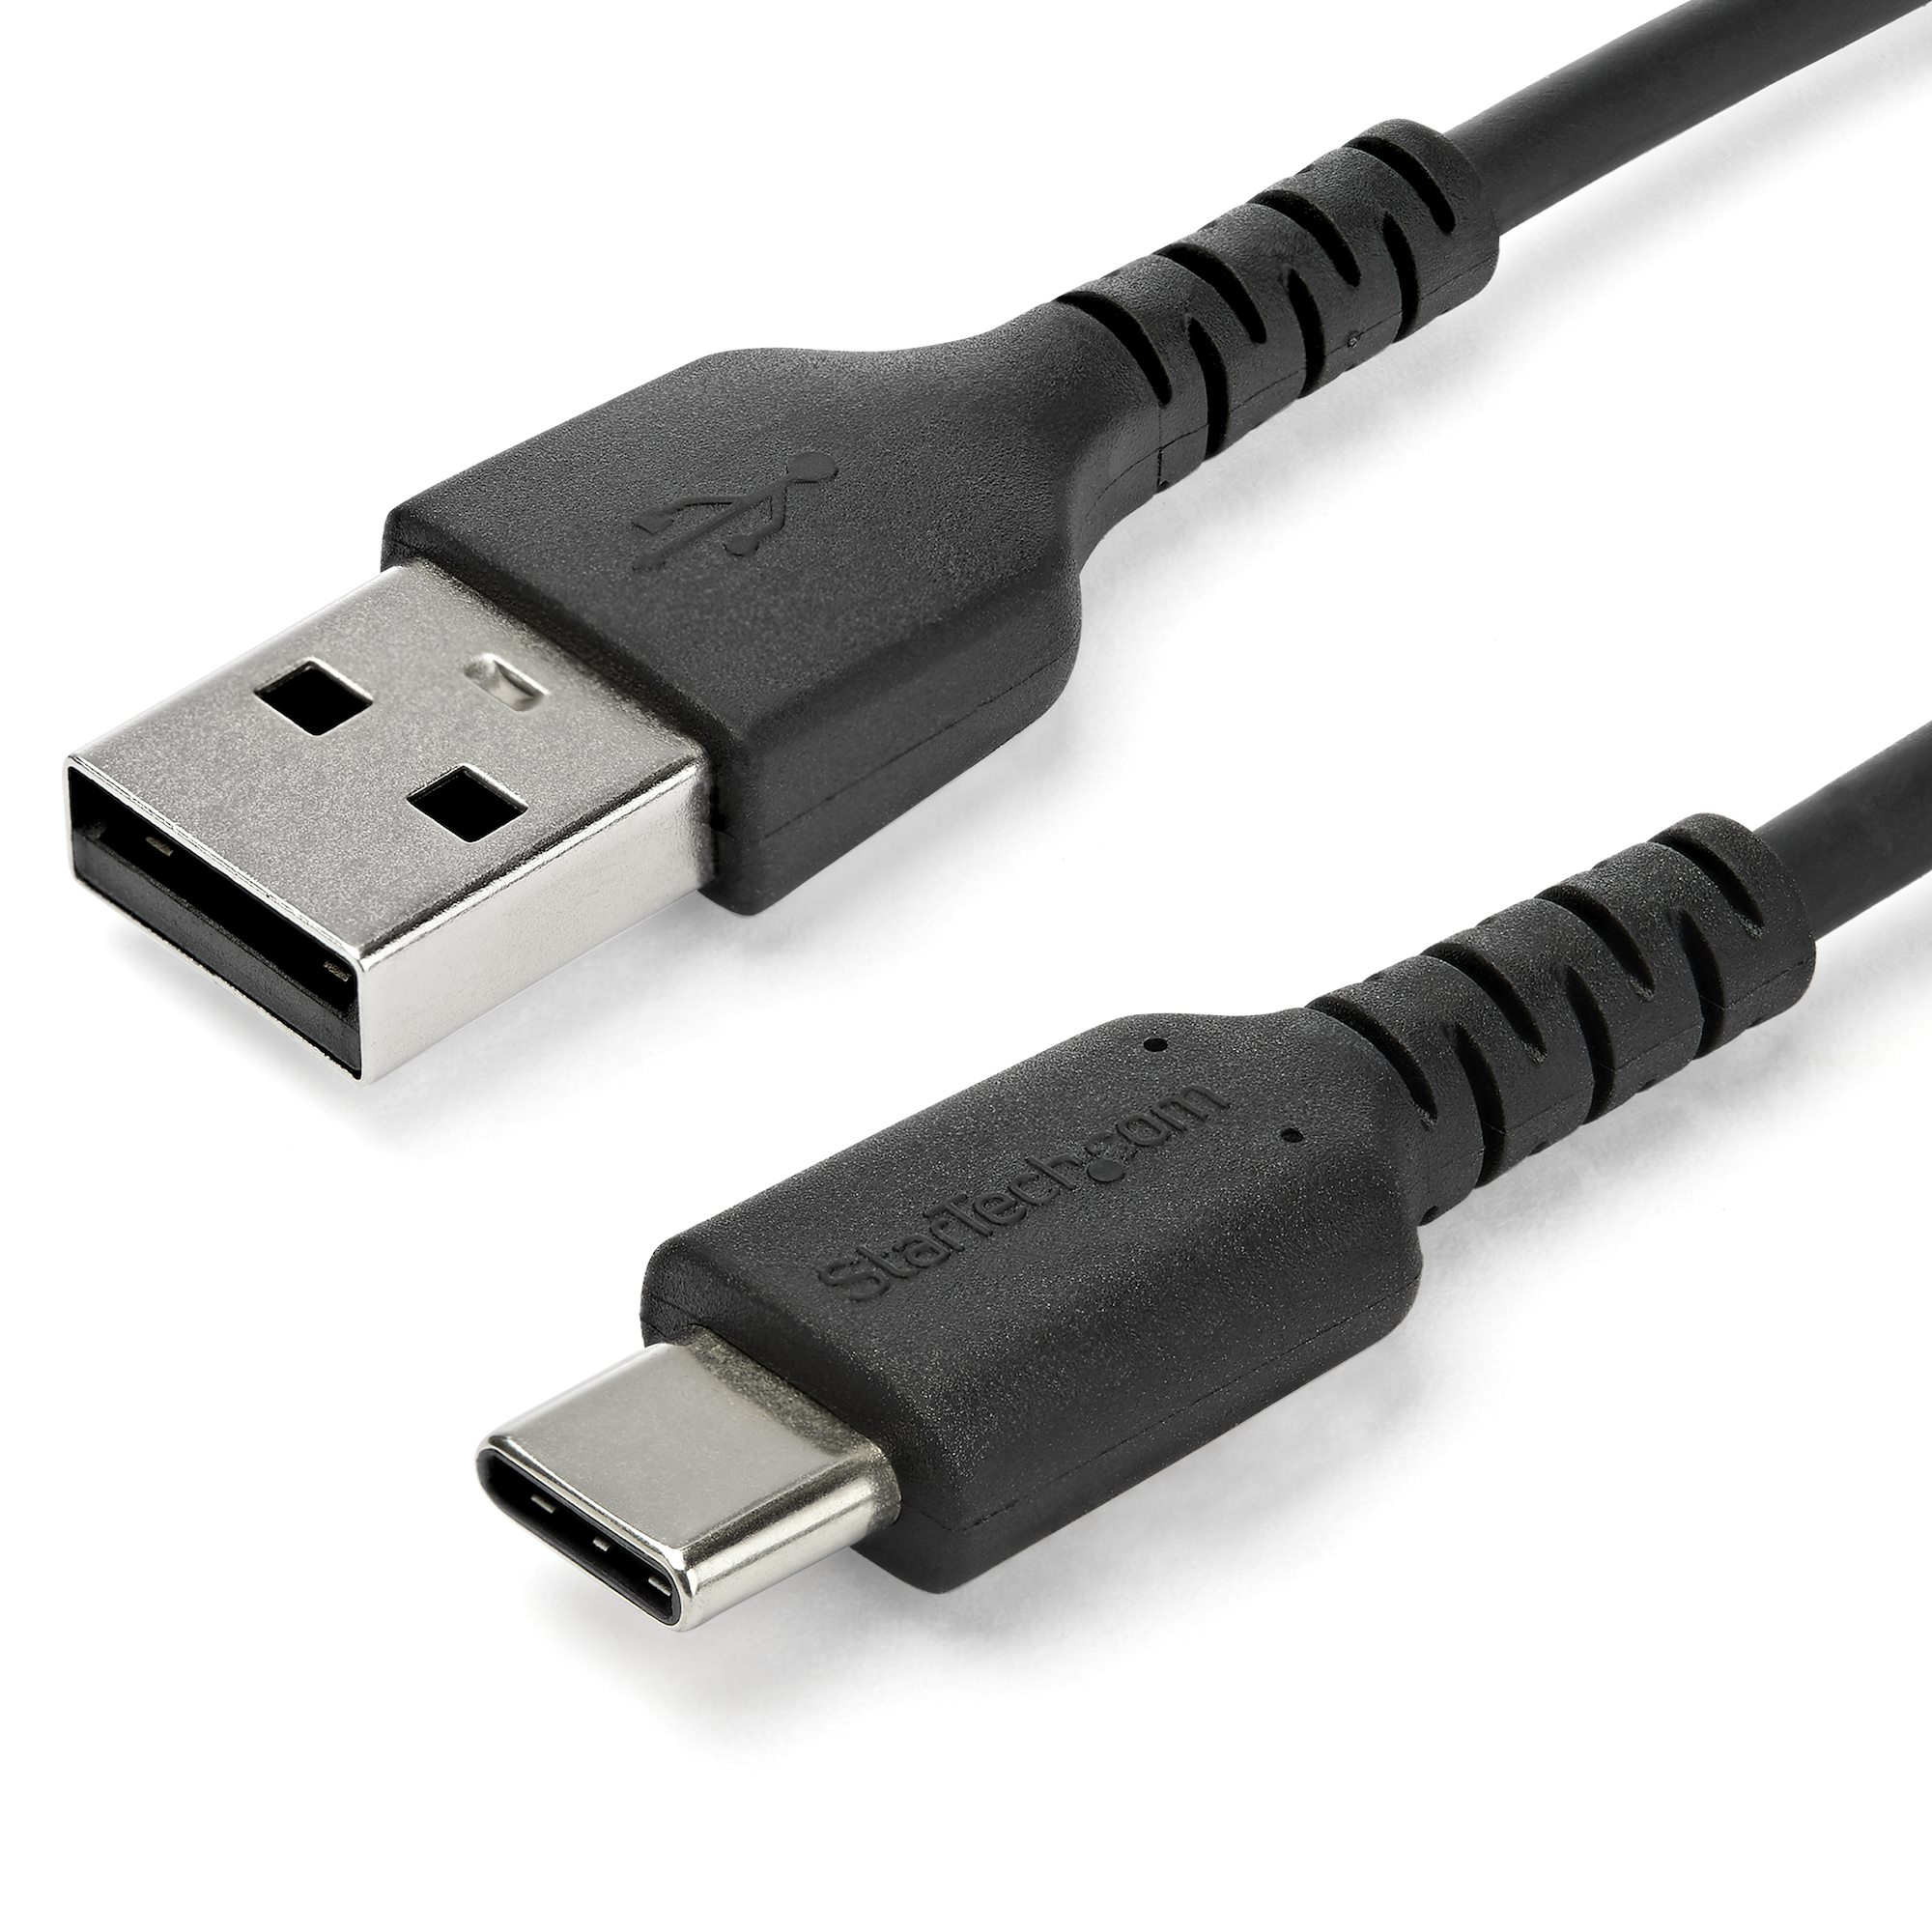 StarTech.com 1m USB A to USB C Charging Cable - Durable Fast Charge & Sync USB 2.0 to USB Type C Data Cord - Rugged TPE Jacket Aramid Fiber M/M 3A Black - Samsung S10, iPad Pro, Pixel